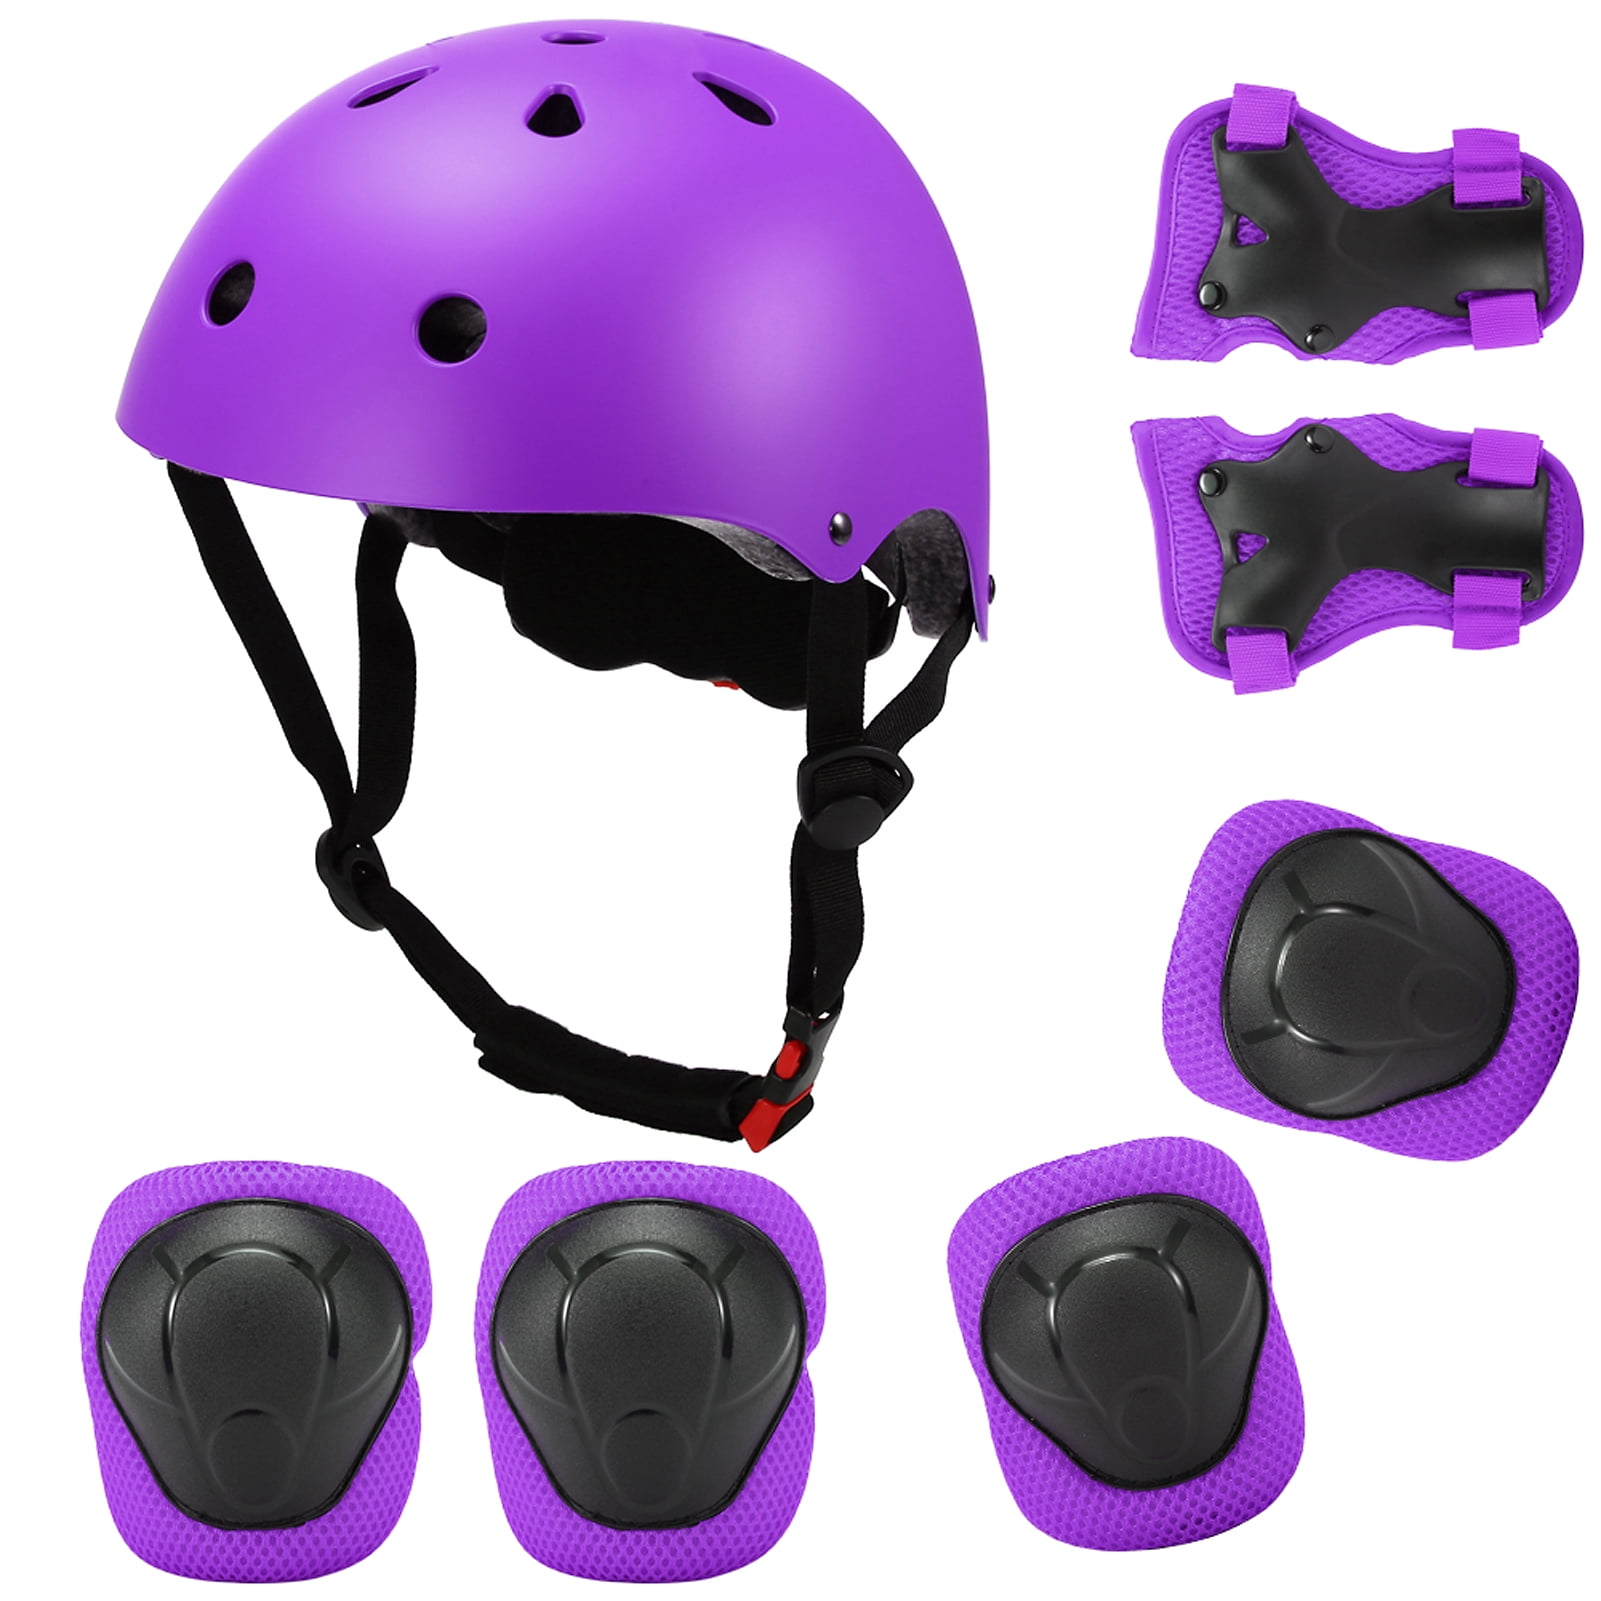 Skateboard Helmets and Pads For Adults and Kids